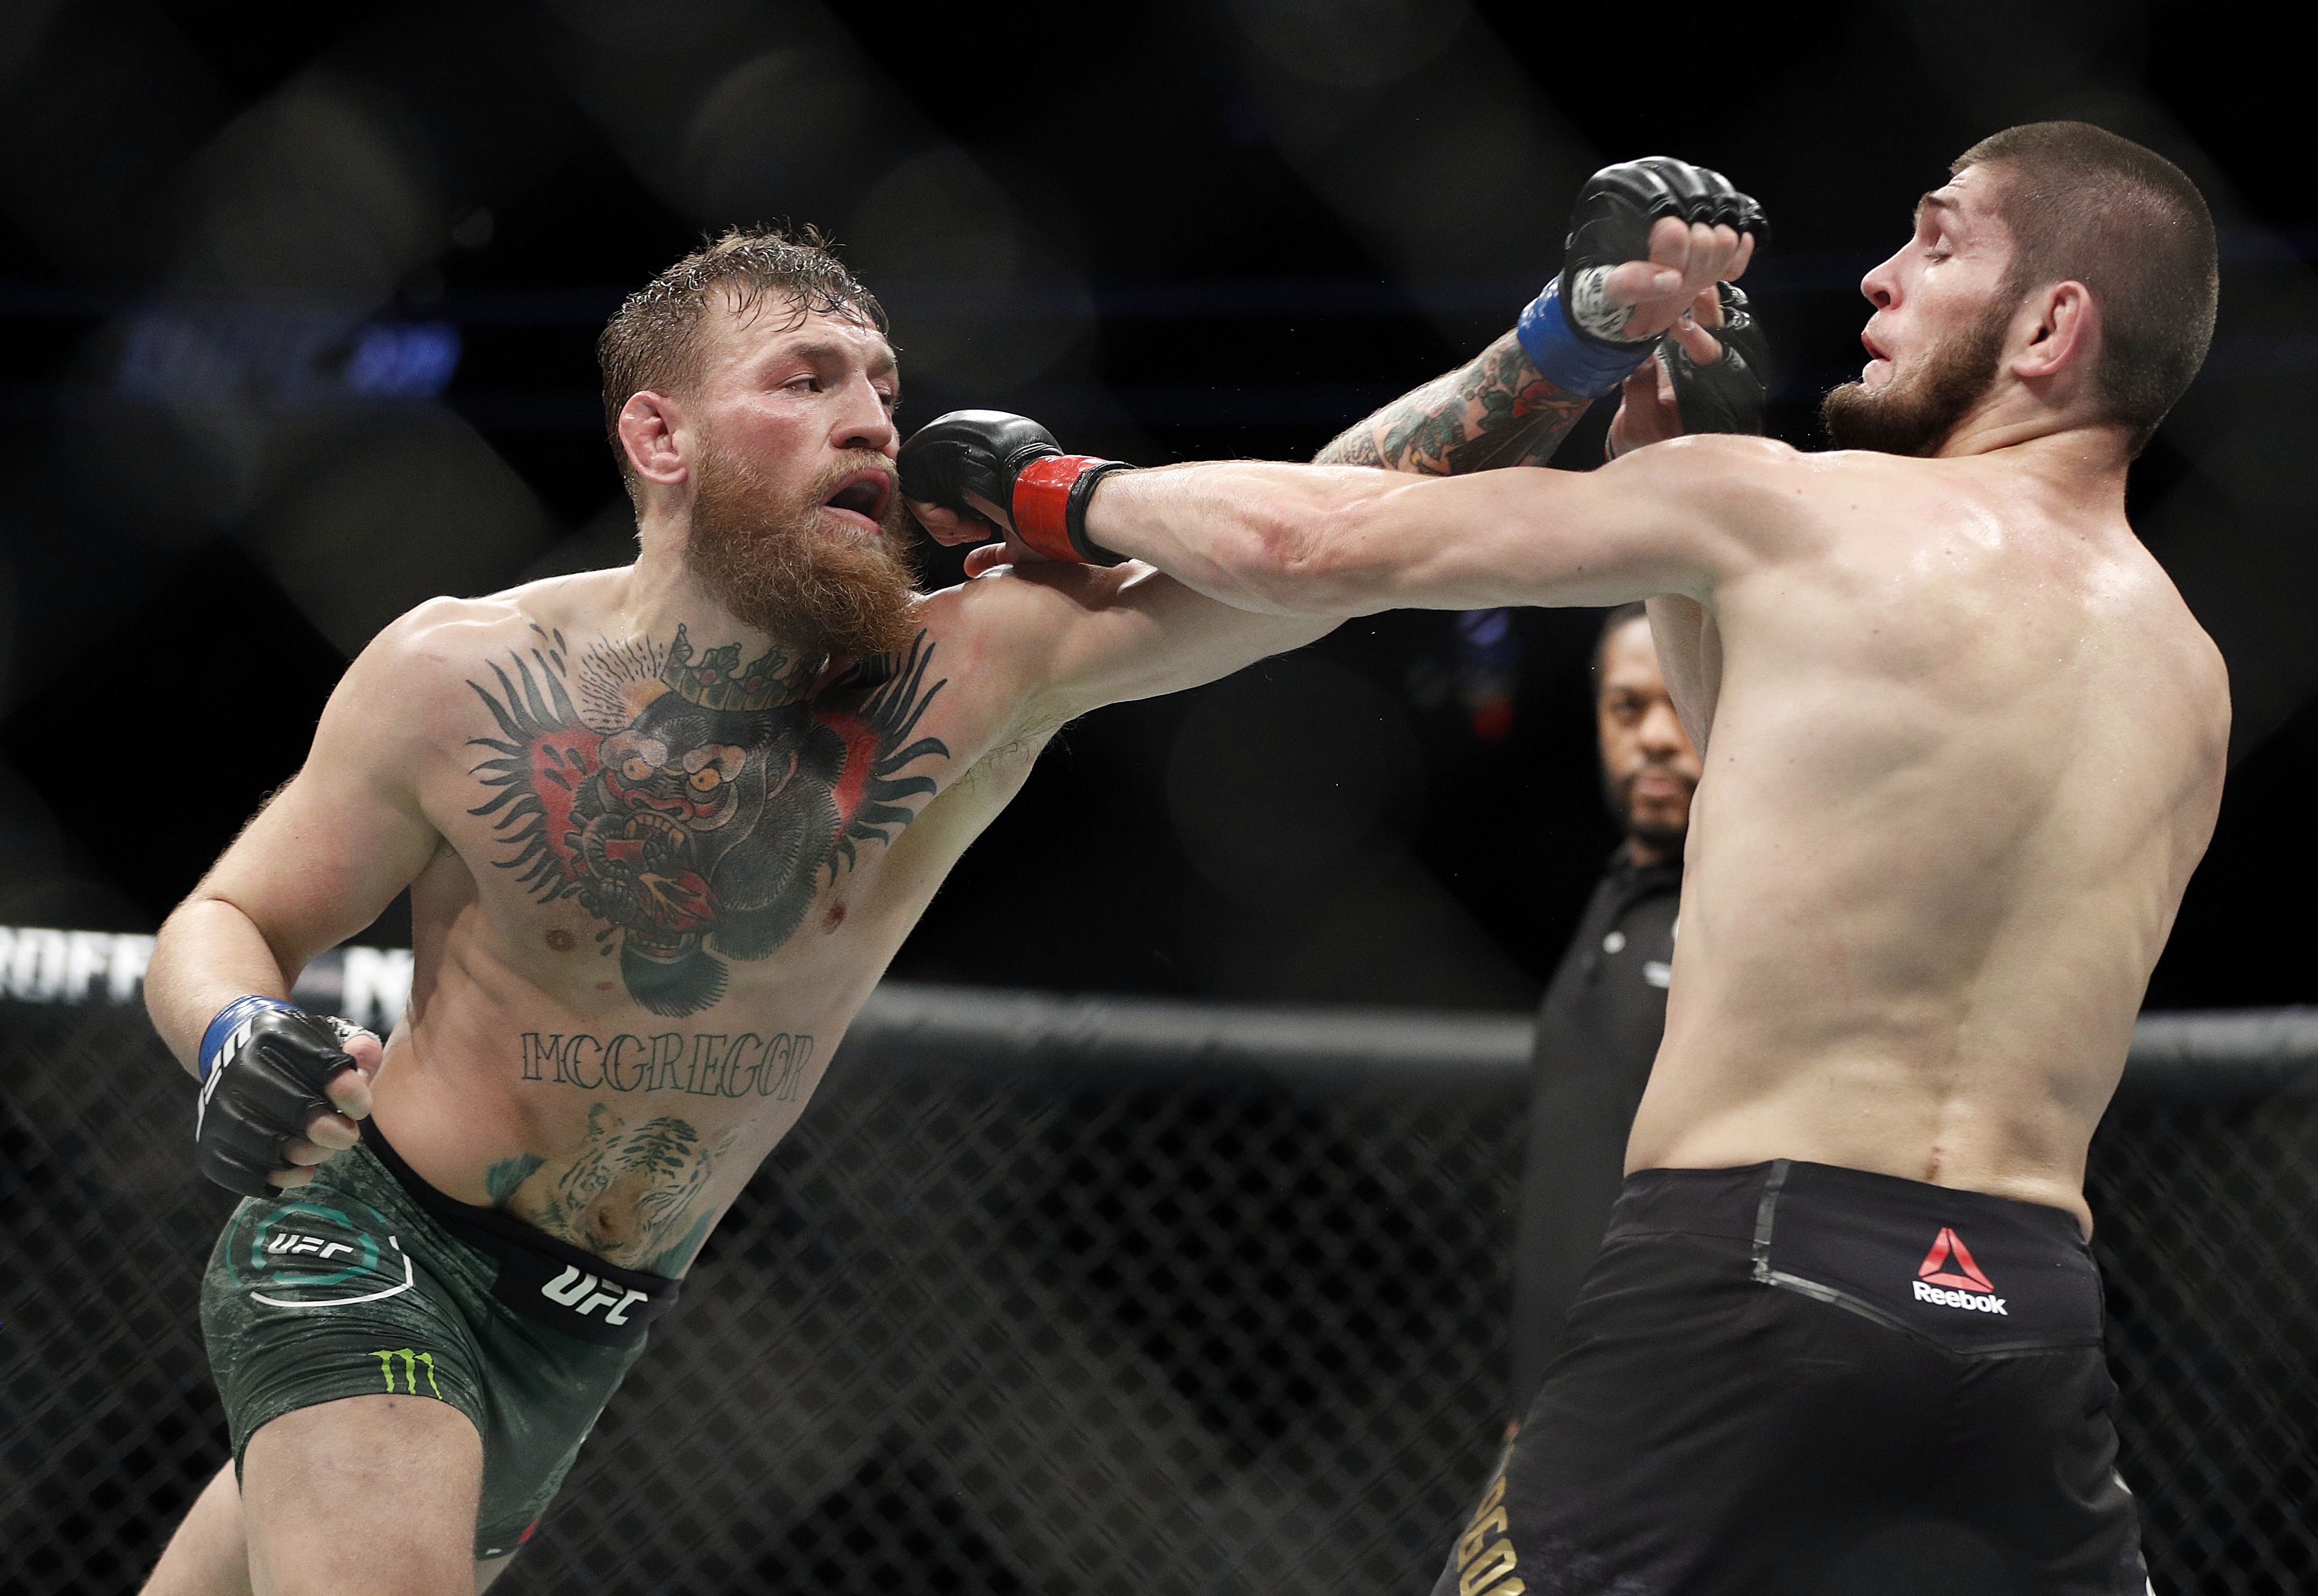 NASC Released Half Of Khabib's $2 Million Fight Purse, Extend Suspensions  For Him And Mcgregor – Fitness Volt